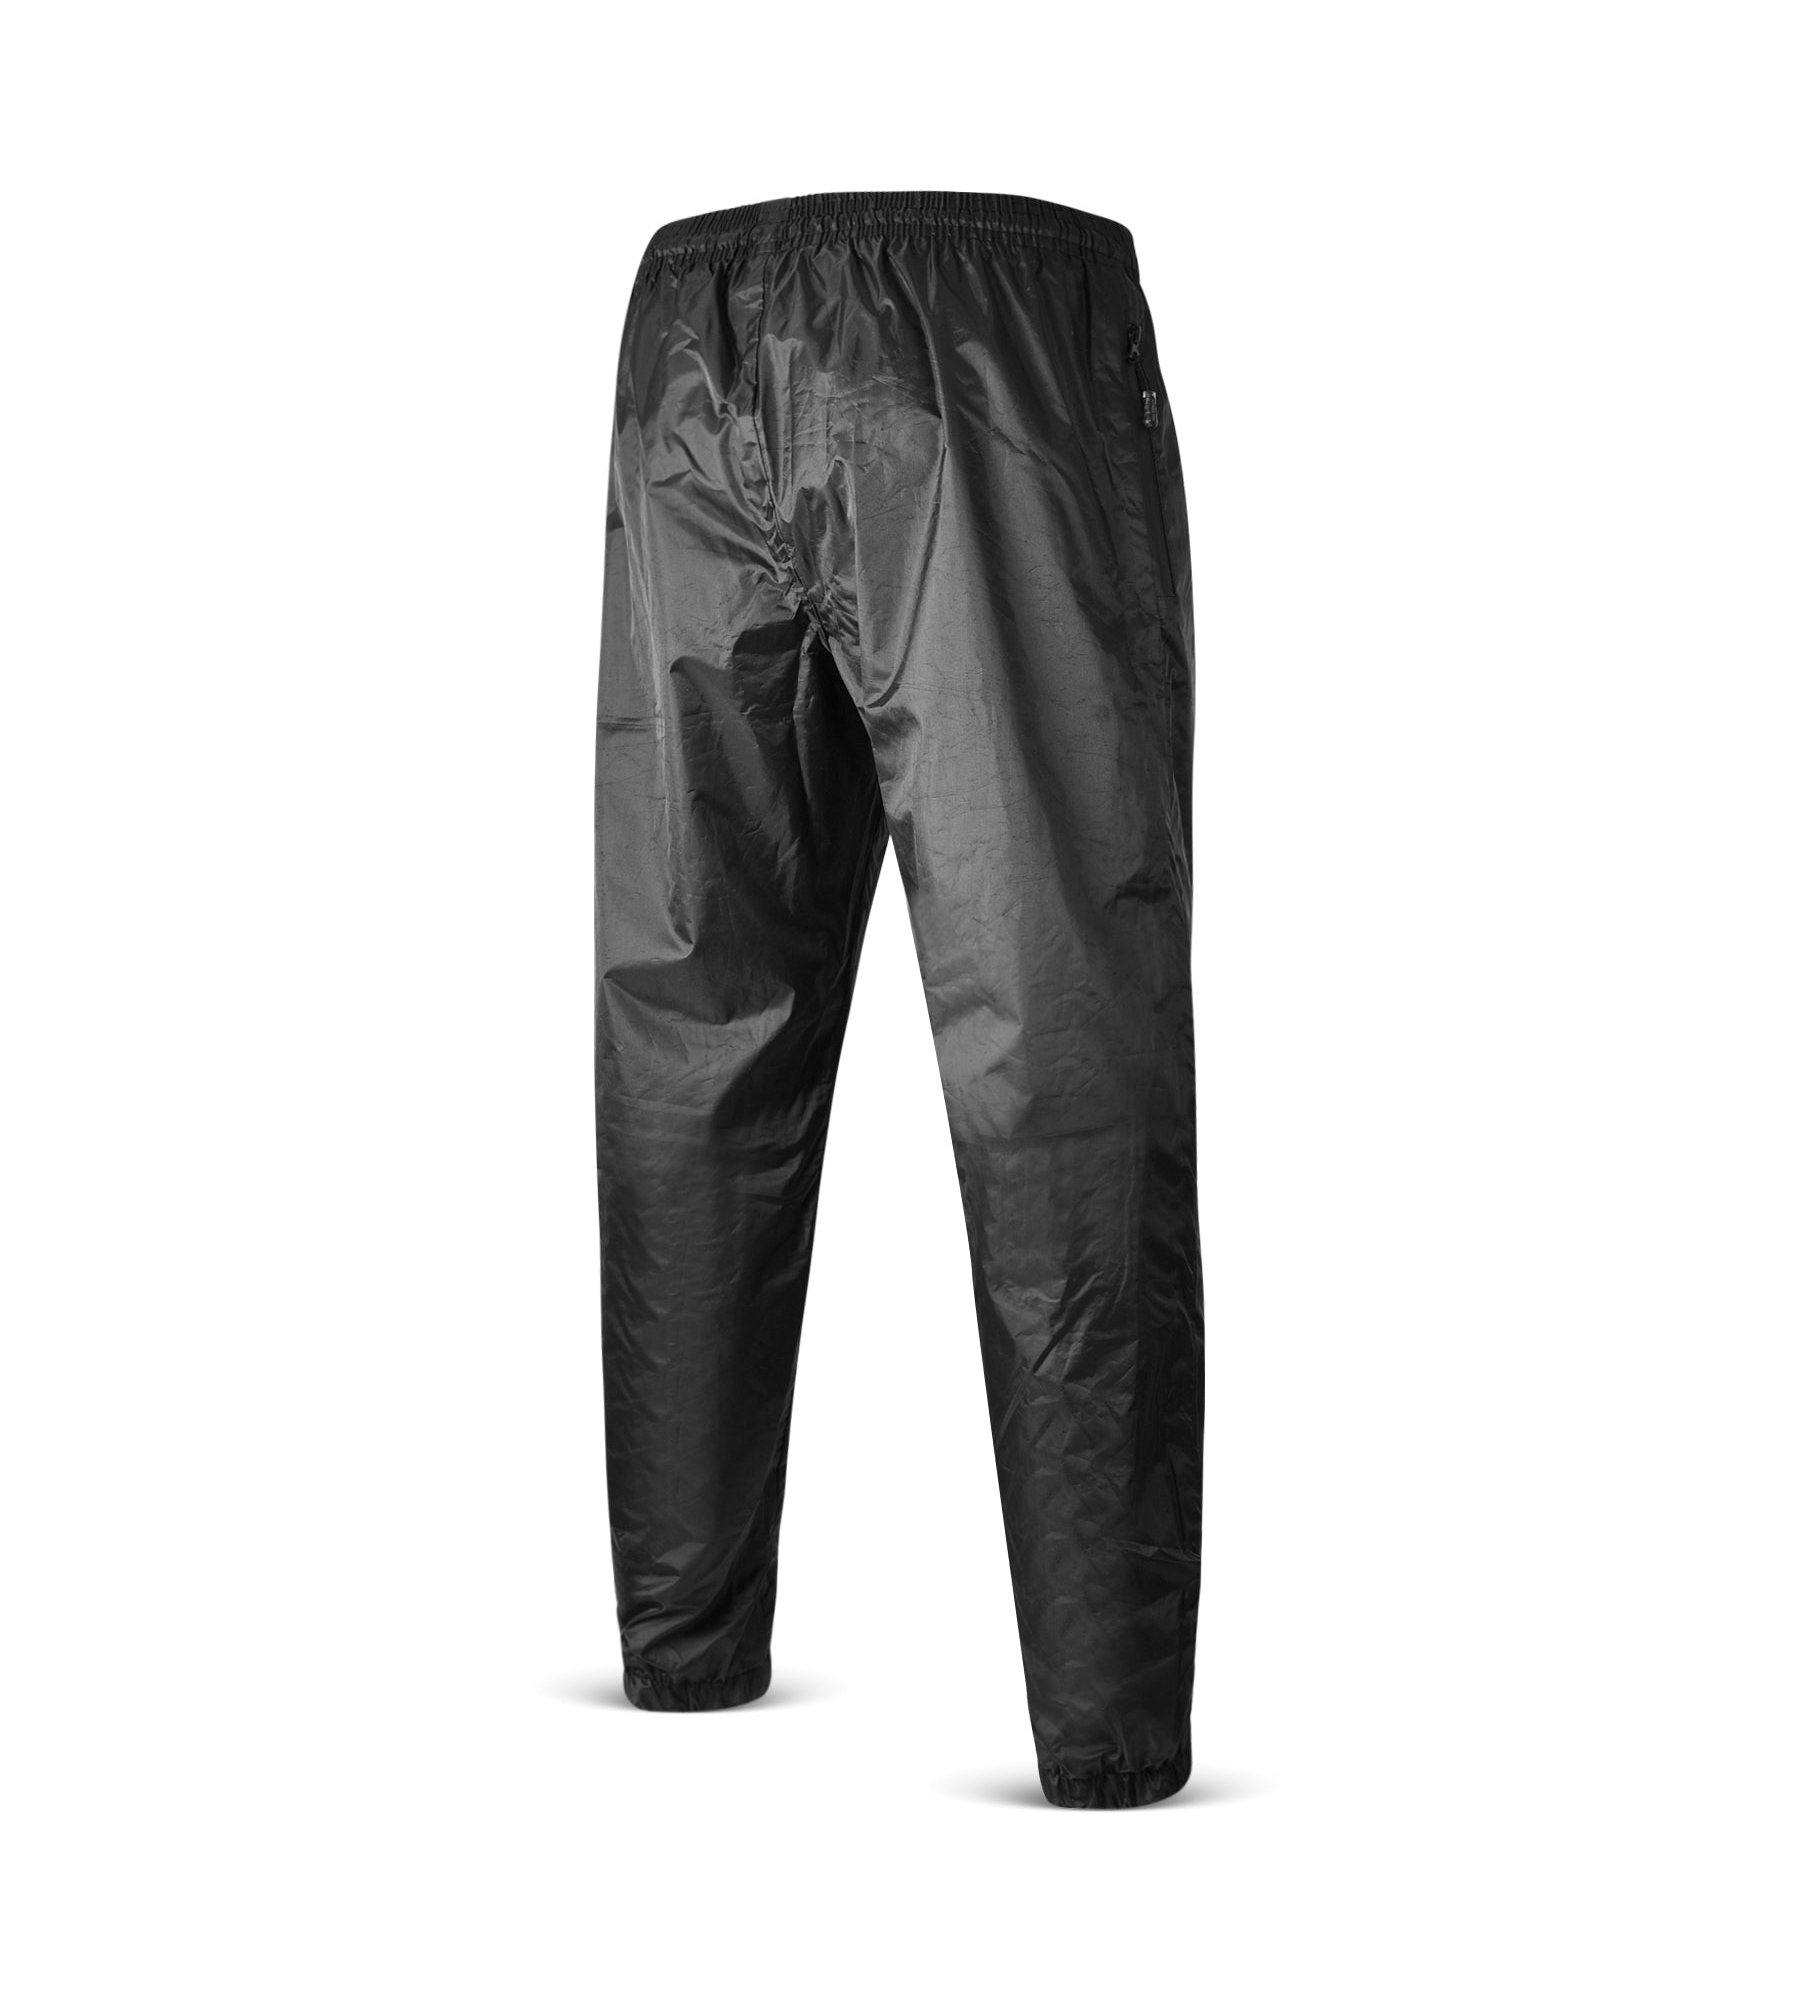 FITNESS FOX Sweat Sauna PANT for Workout- Black/White